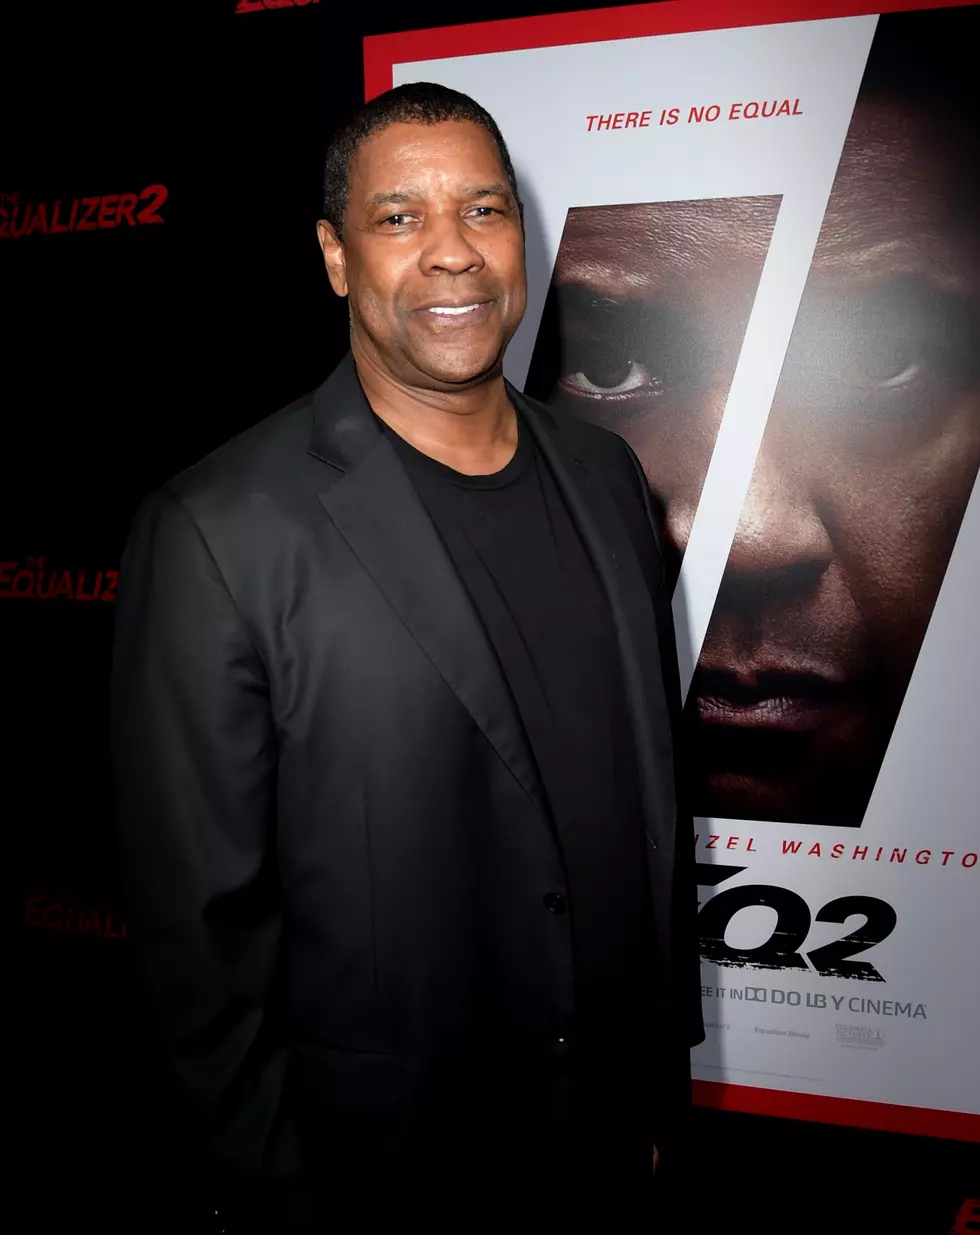 Is The Equalizer 2 Worth Seeing in Theaters?